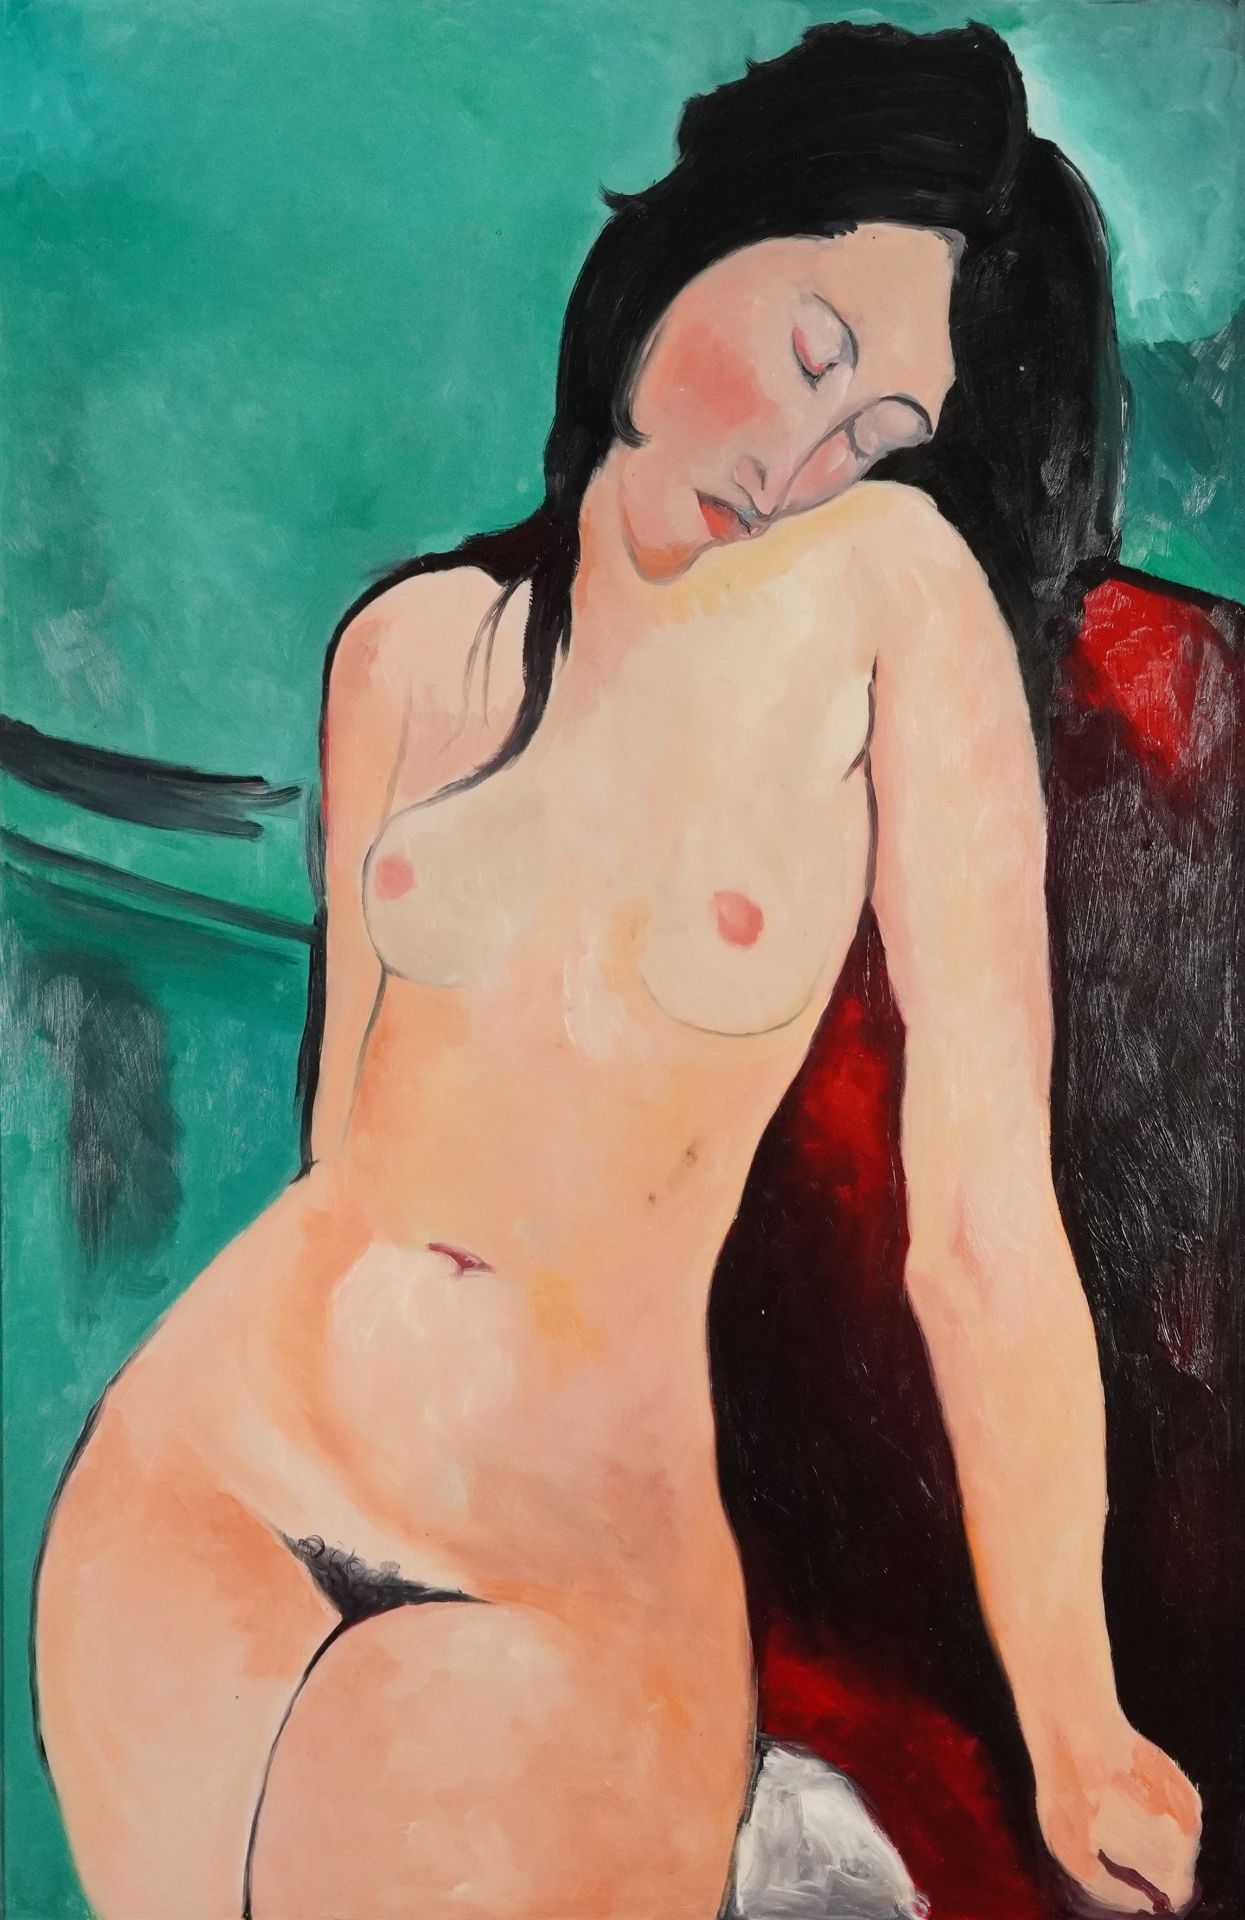 Clive Fredriksson after Amedeo Modigliani - Nude female, Impressionist oil on board, framed, 90. - Image 2 of 3